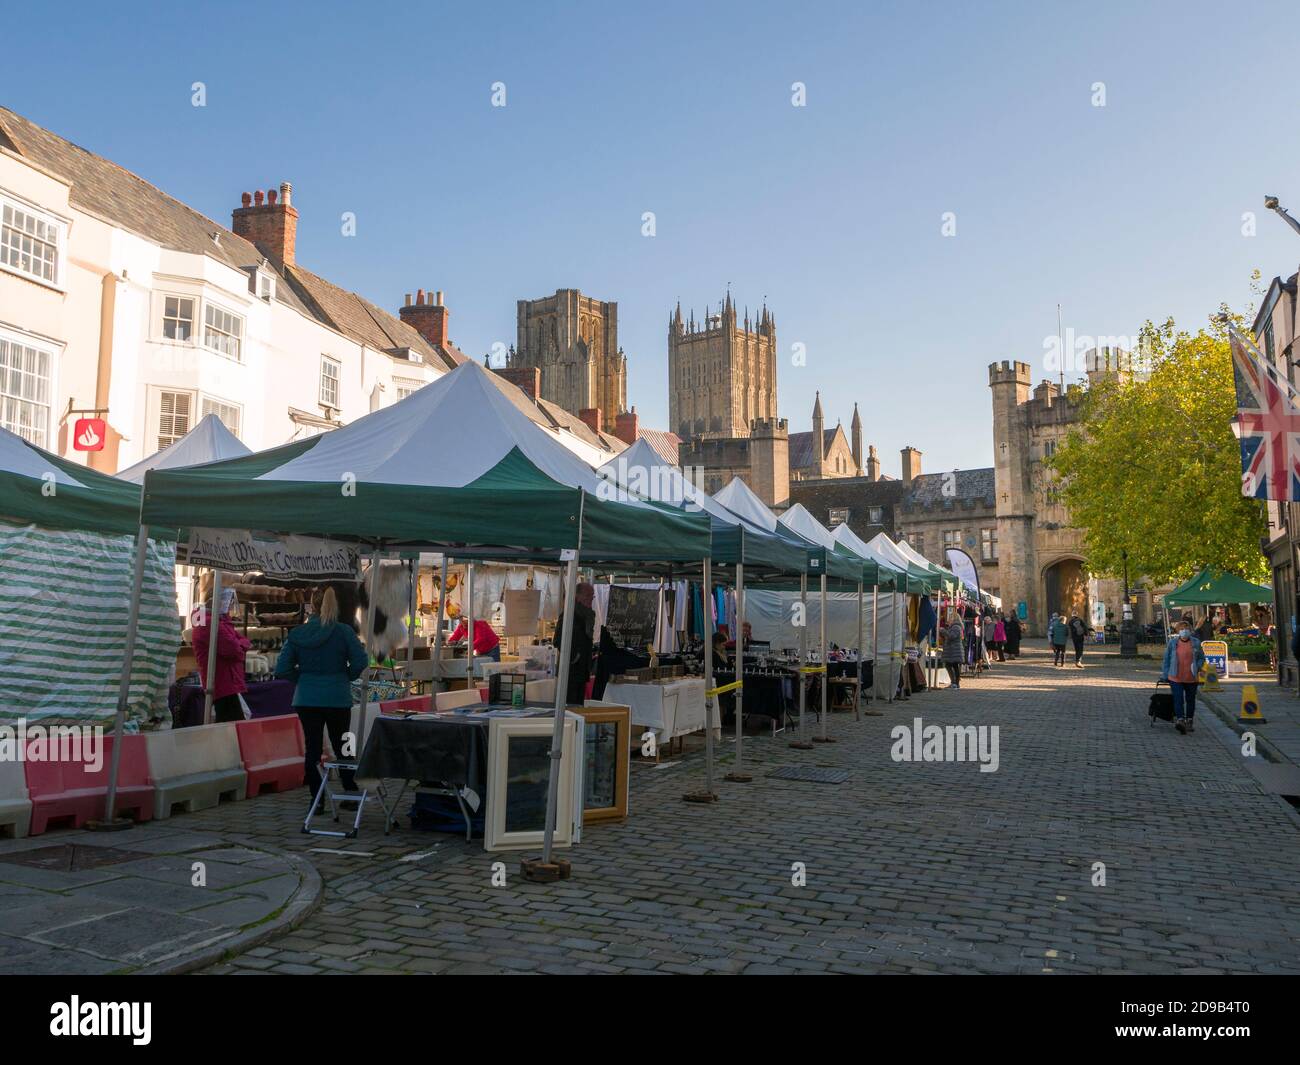 The bi-weekly market taking place at Market Place in the city of Wells with the cathedral in the distance, Somerset, England. Stock Photo